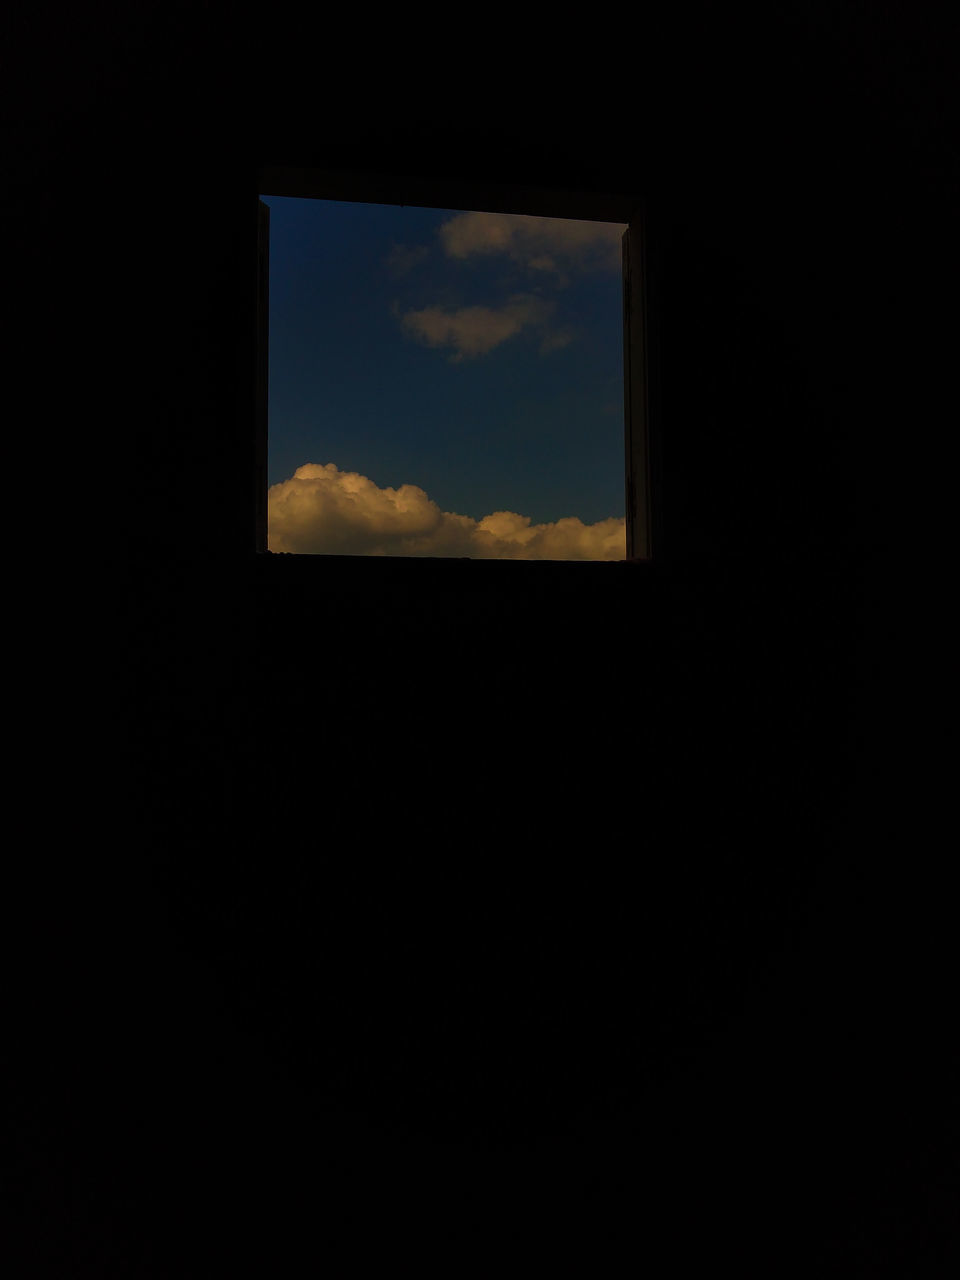 sky, cloud, copy space, nature, no people, darkness, window, dark, light, indoors, silhouette, architecture, beauty in nature